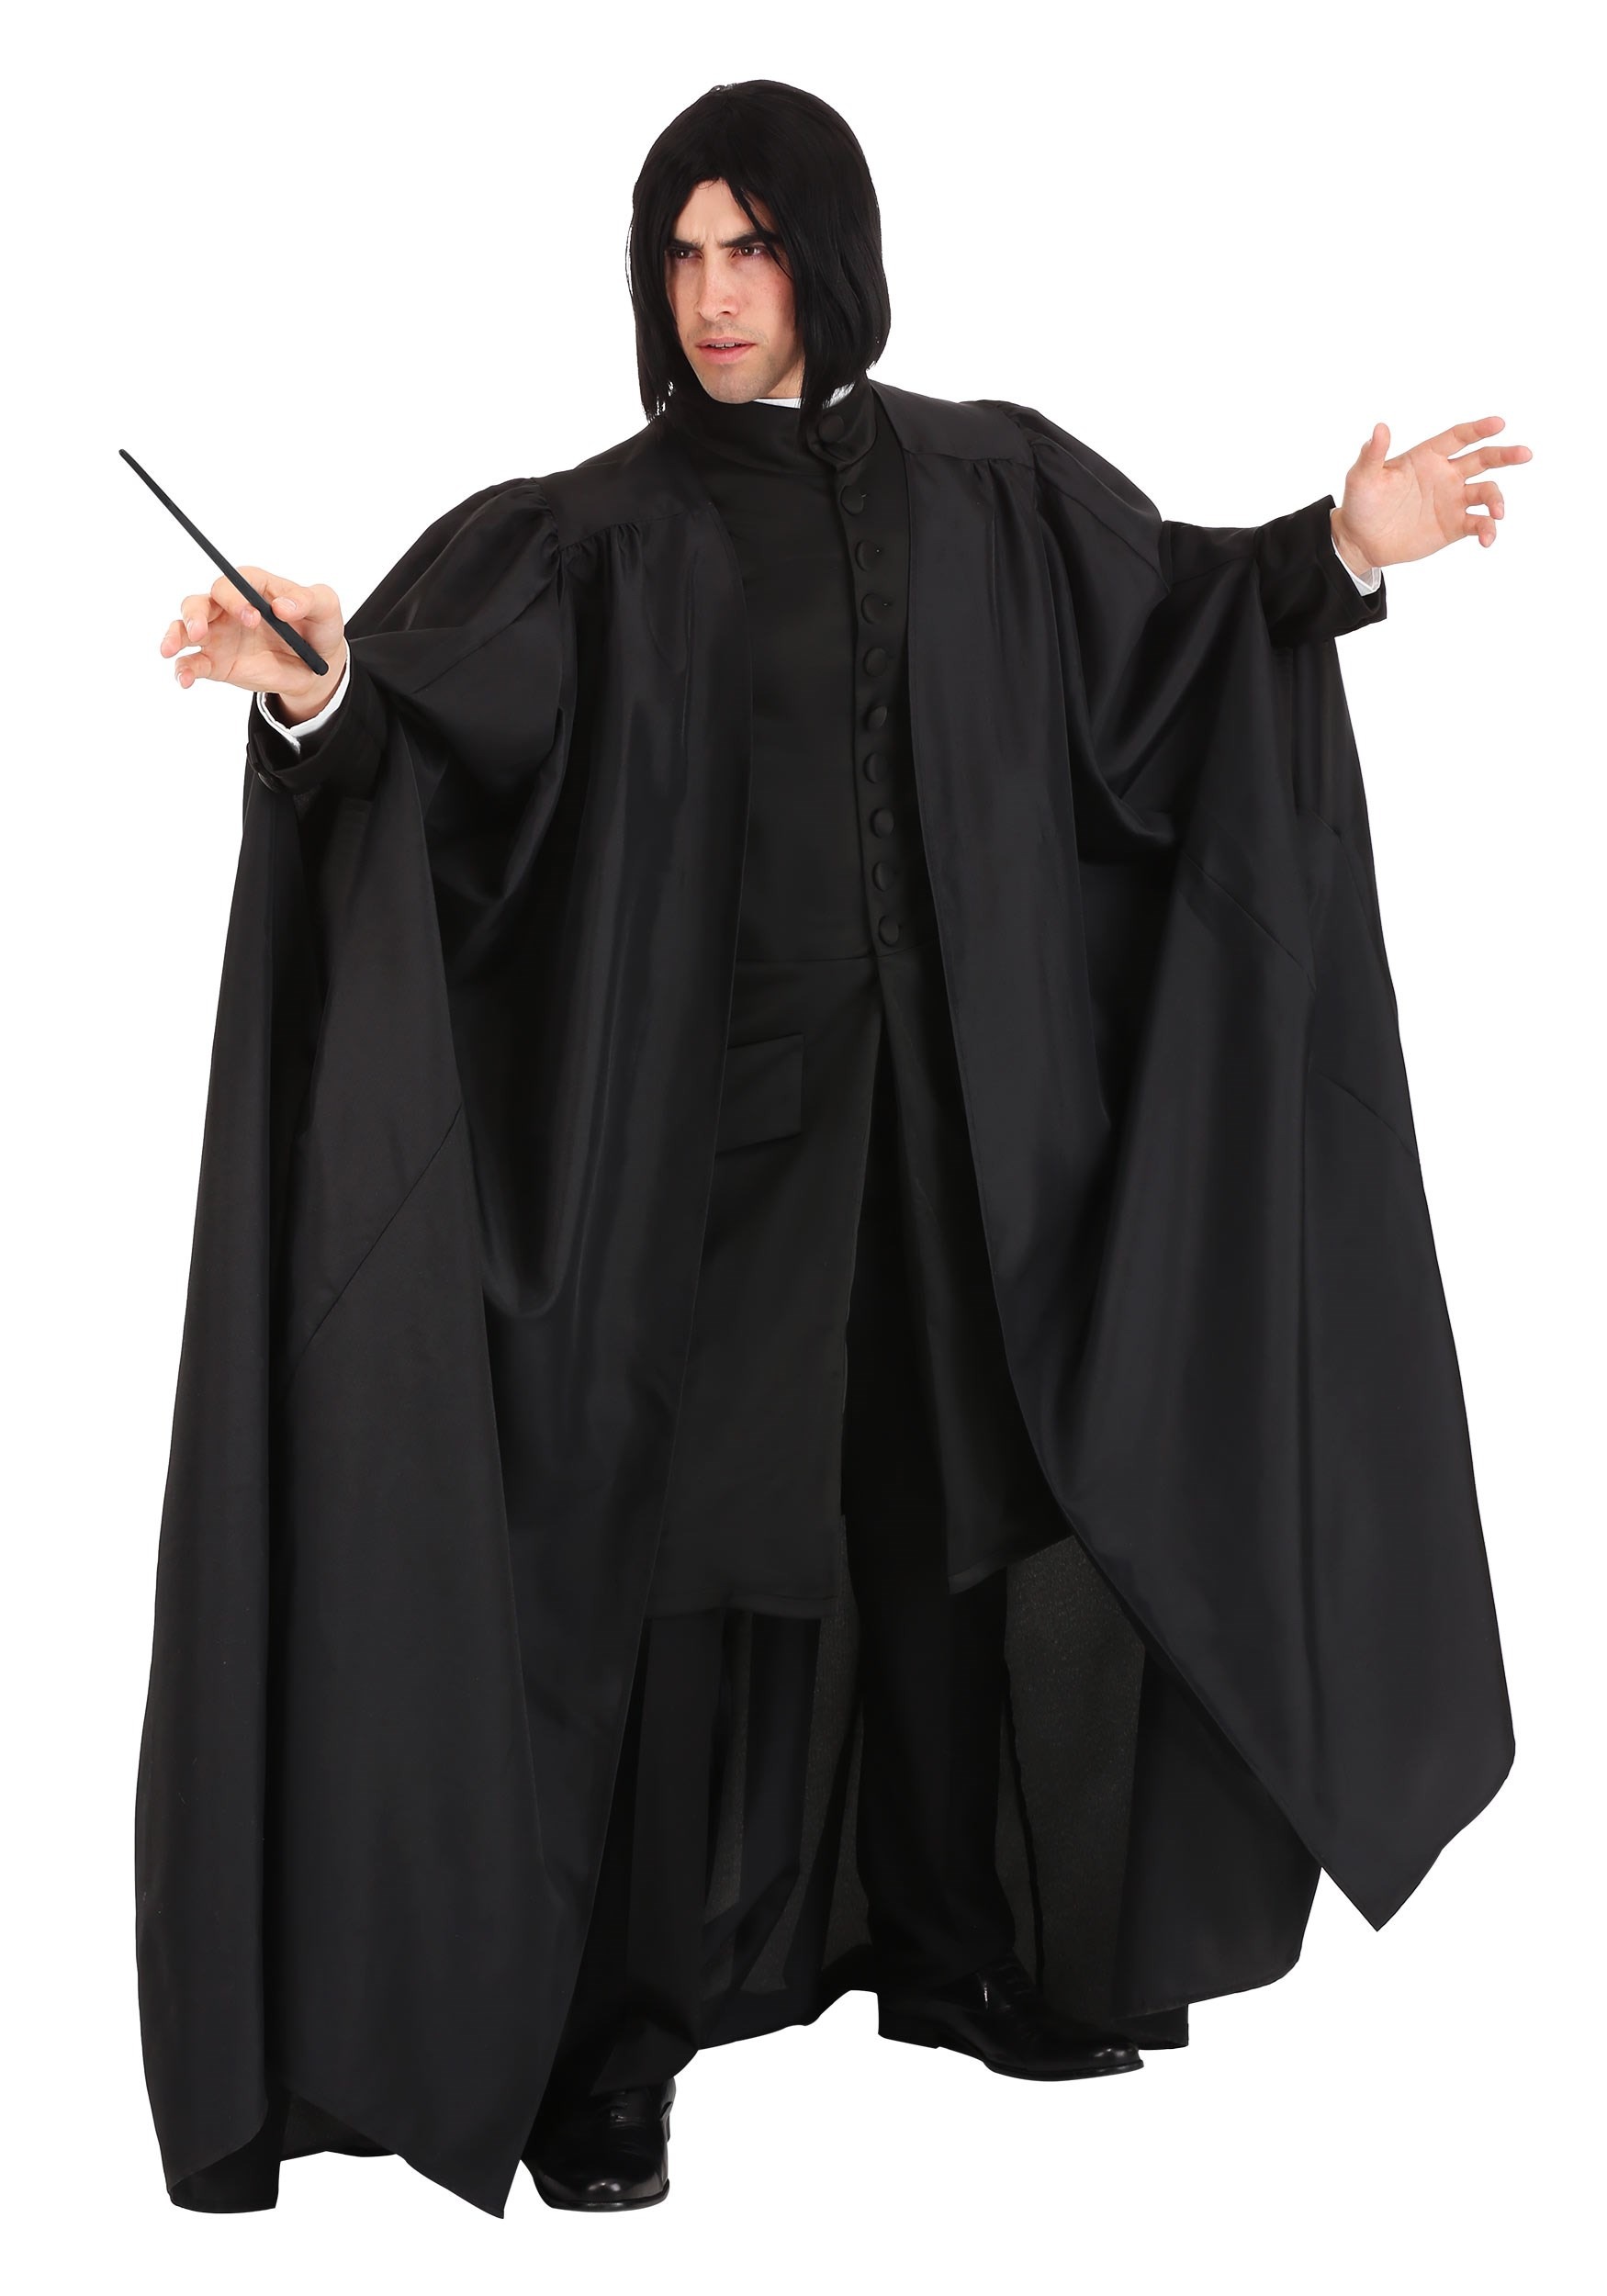 Image of Jerry Leigh Deluxe Harry Potter Snape Costume for Men